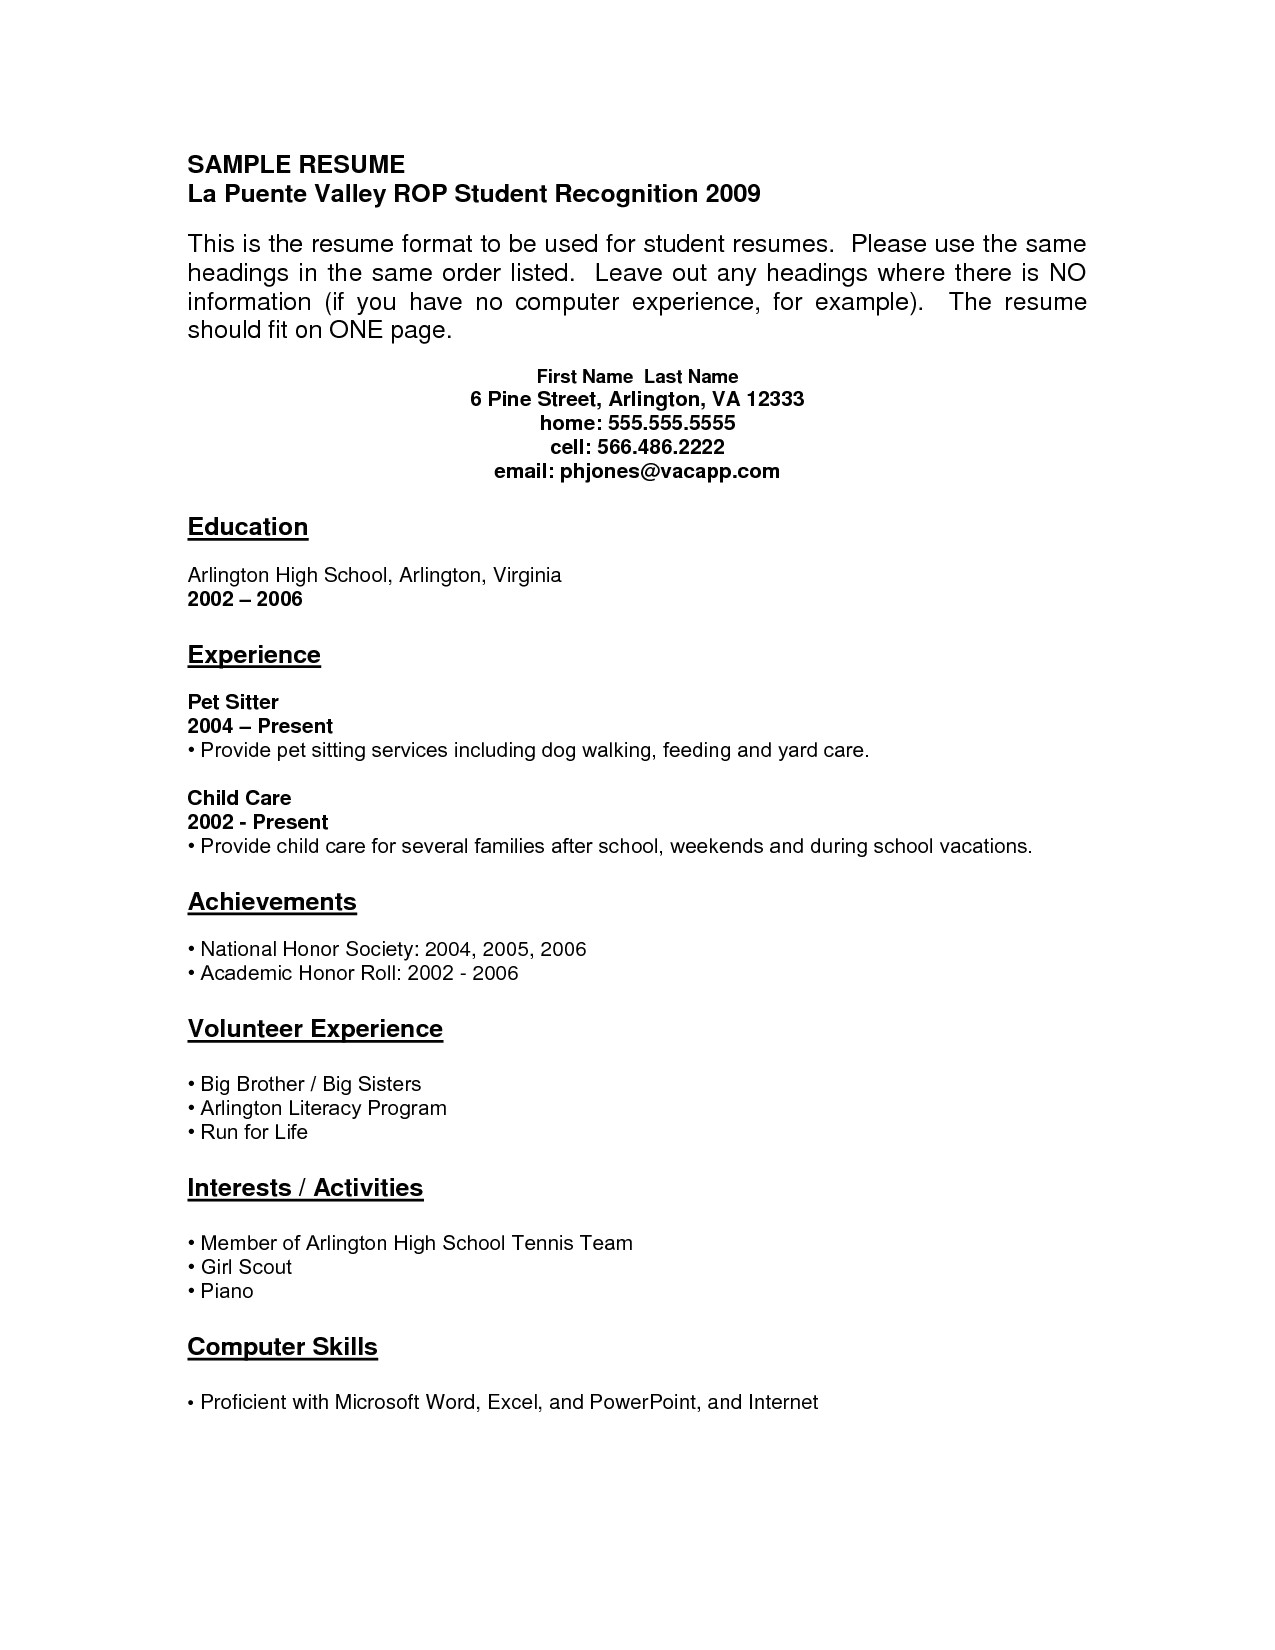 resume for highschool students with no experience work samples examples high school template